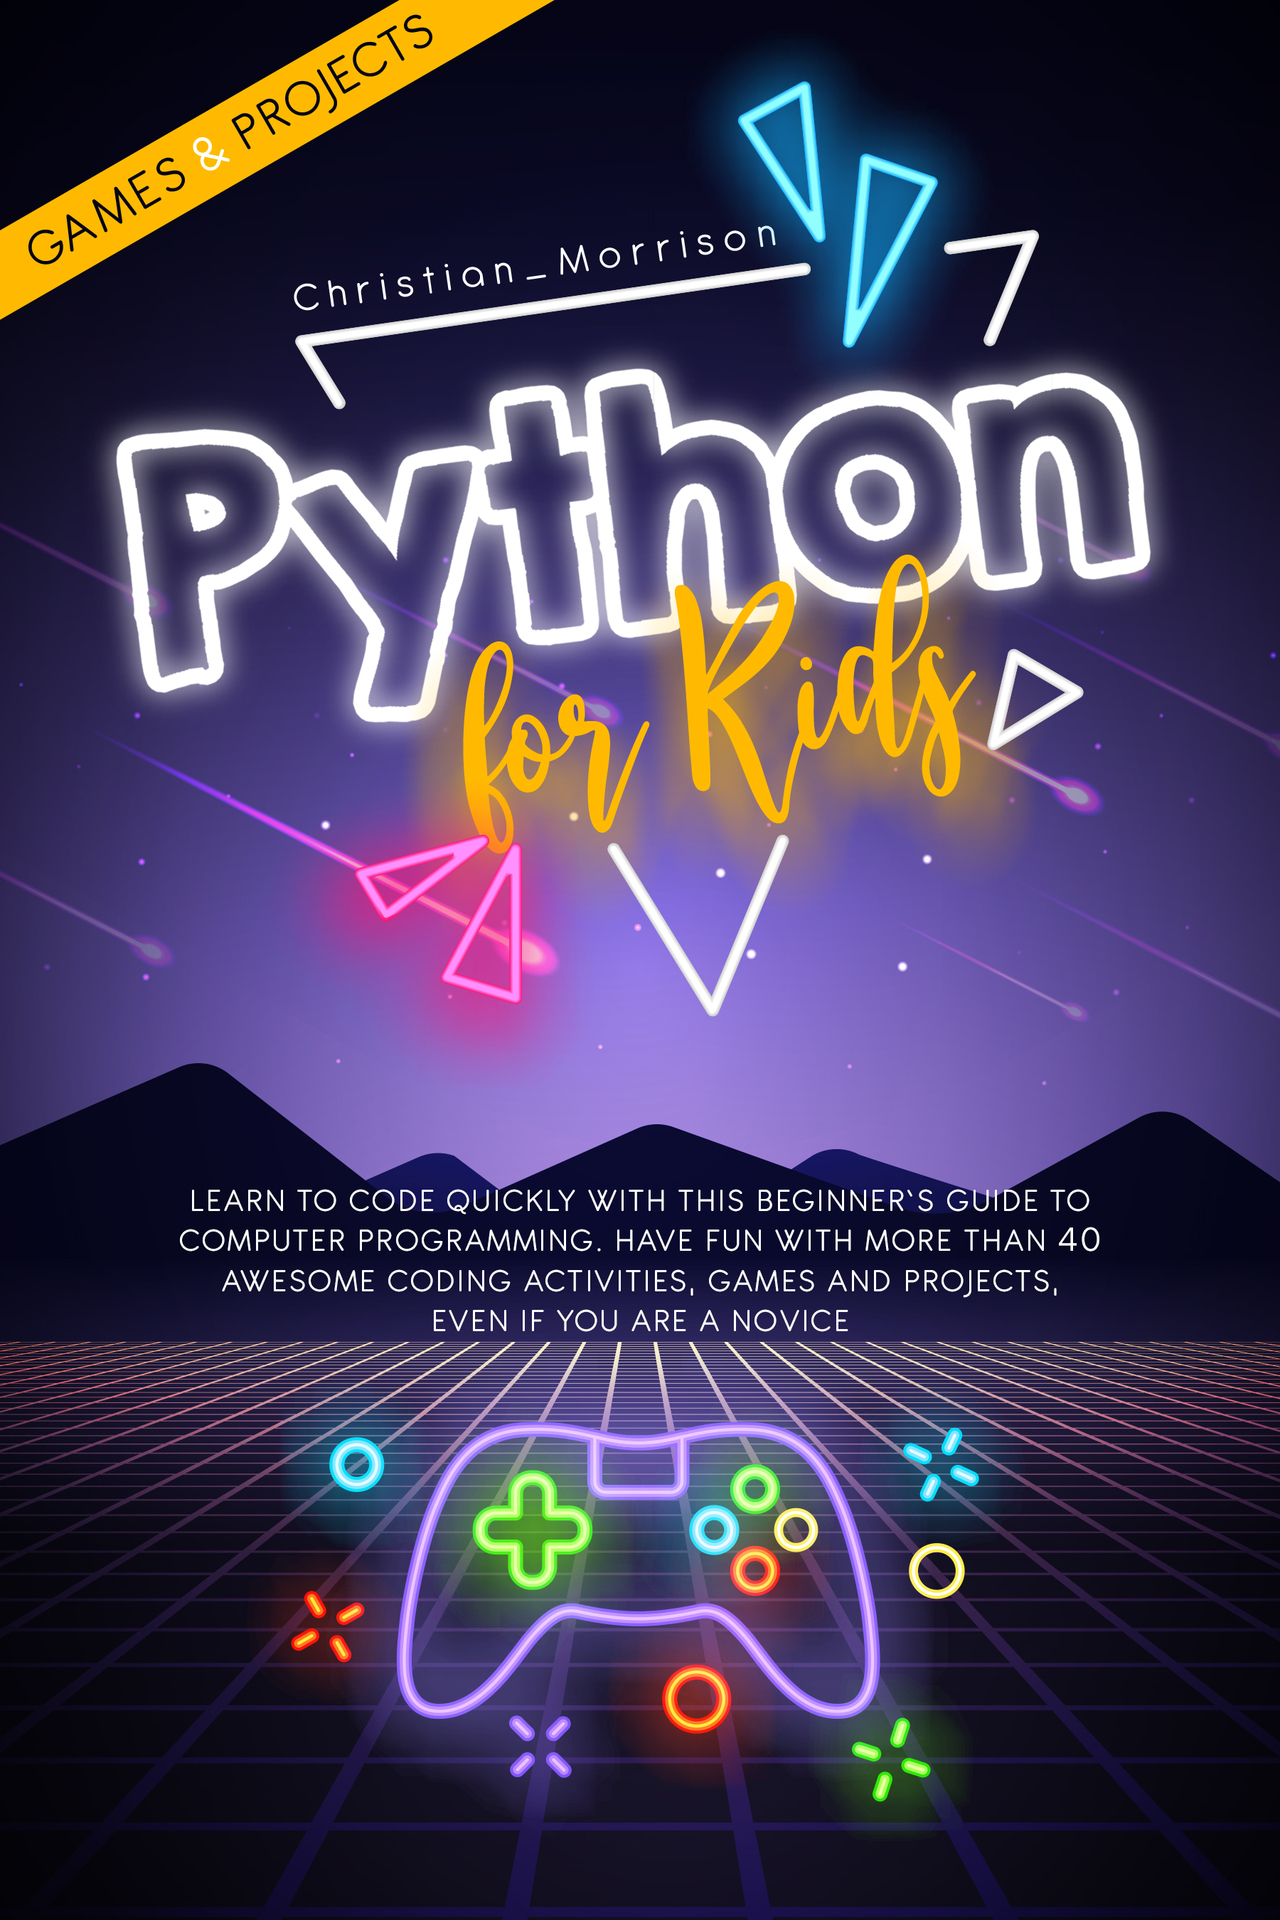 Python for Kids: Learn To Code Quickly With This Beginner’s Guide To Computer Programming. Have Fun With More Than 40 Awesome Coding Activities, Games And Projects, Even If You Are A Novice